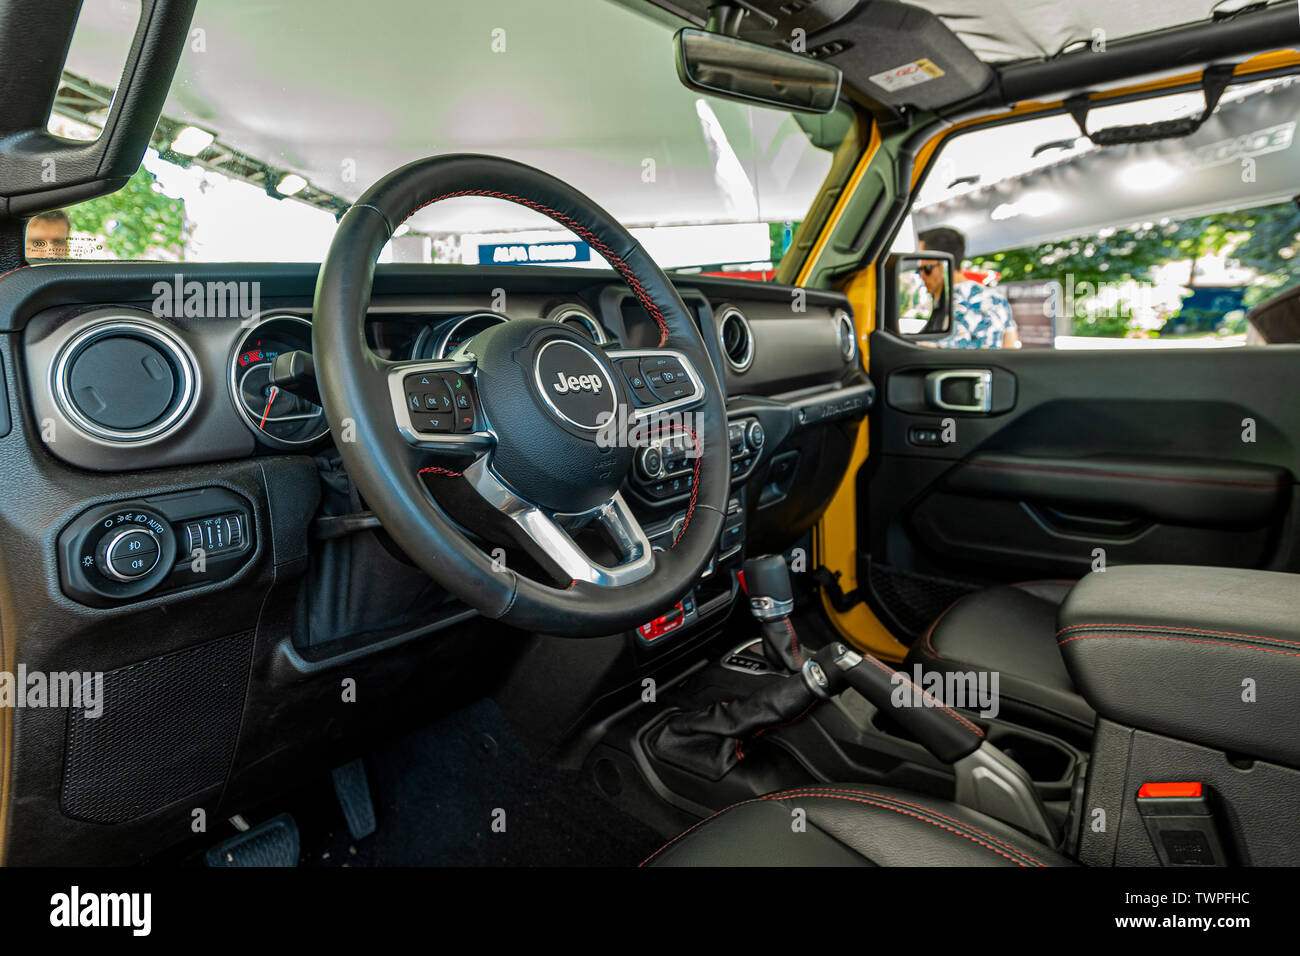 Turin, Piedmont, Italy. 22nd June 2019. Italy Piedmont Turin Valentino park Auto Show 2019 - Jeep interior Credit: Realy Easy Star/Alamy Live News Credit: Realy Easy Star/Alamy Live News Stock Photo